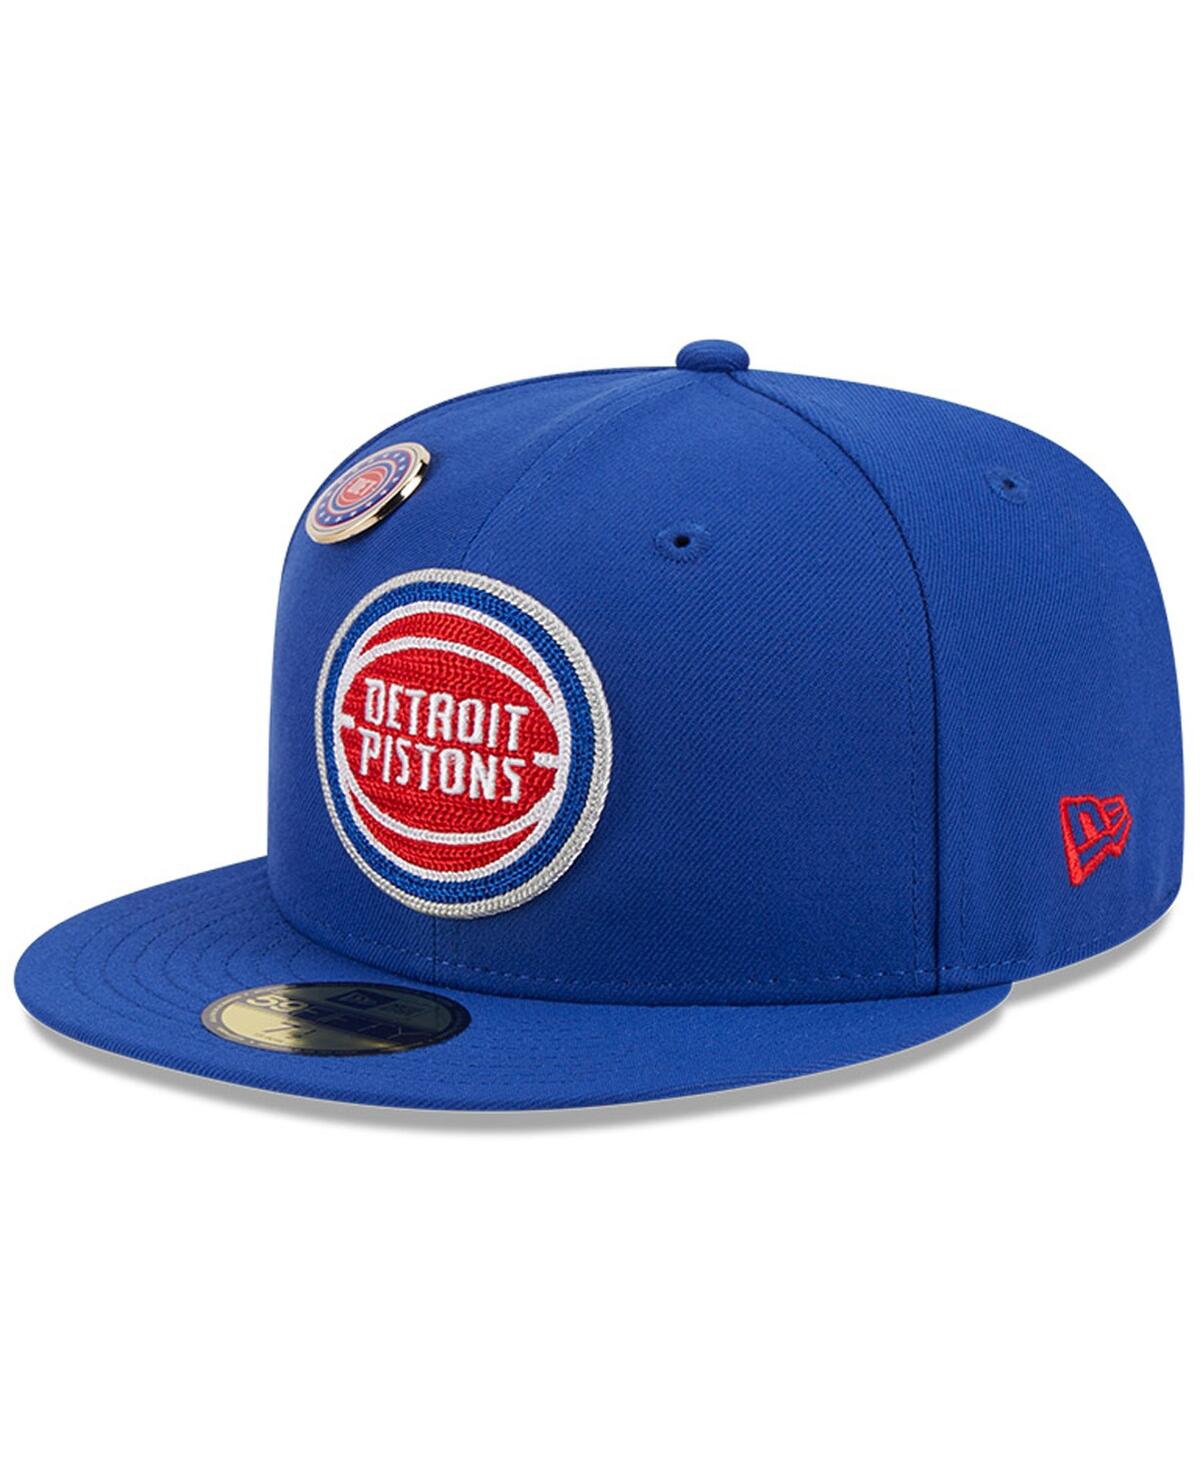 Men's New Era Blue Detroit Pistons Chainstitch Logo Pin 59FIFTY Fitted Hat - Blue